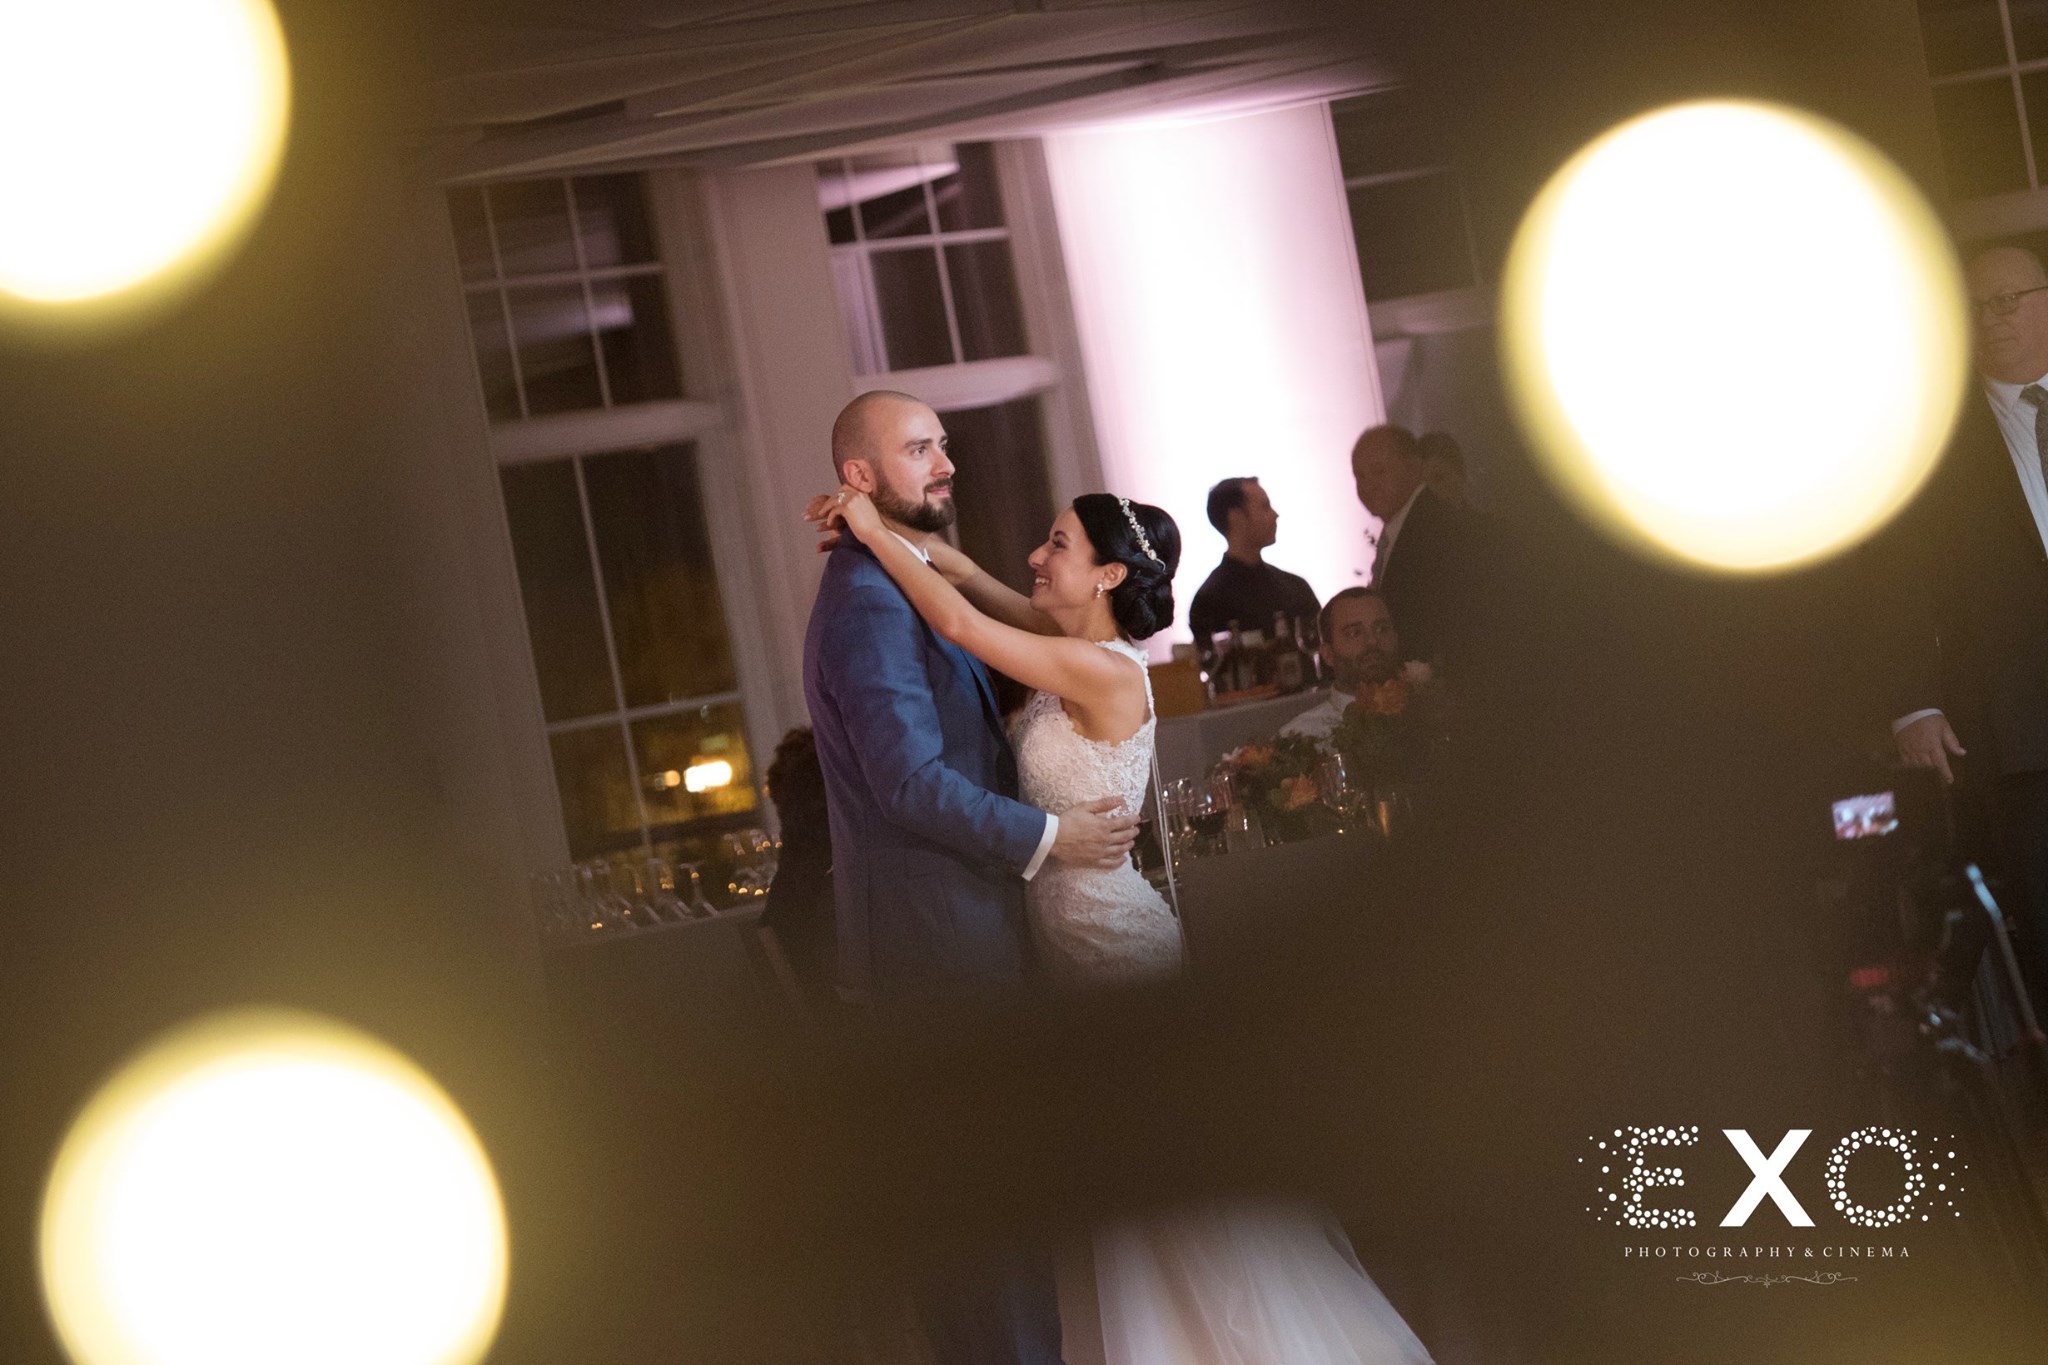 light flare image of bride and groom dancing at reception